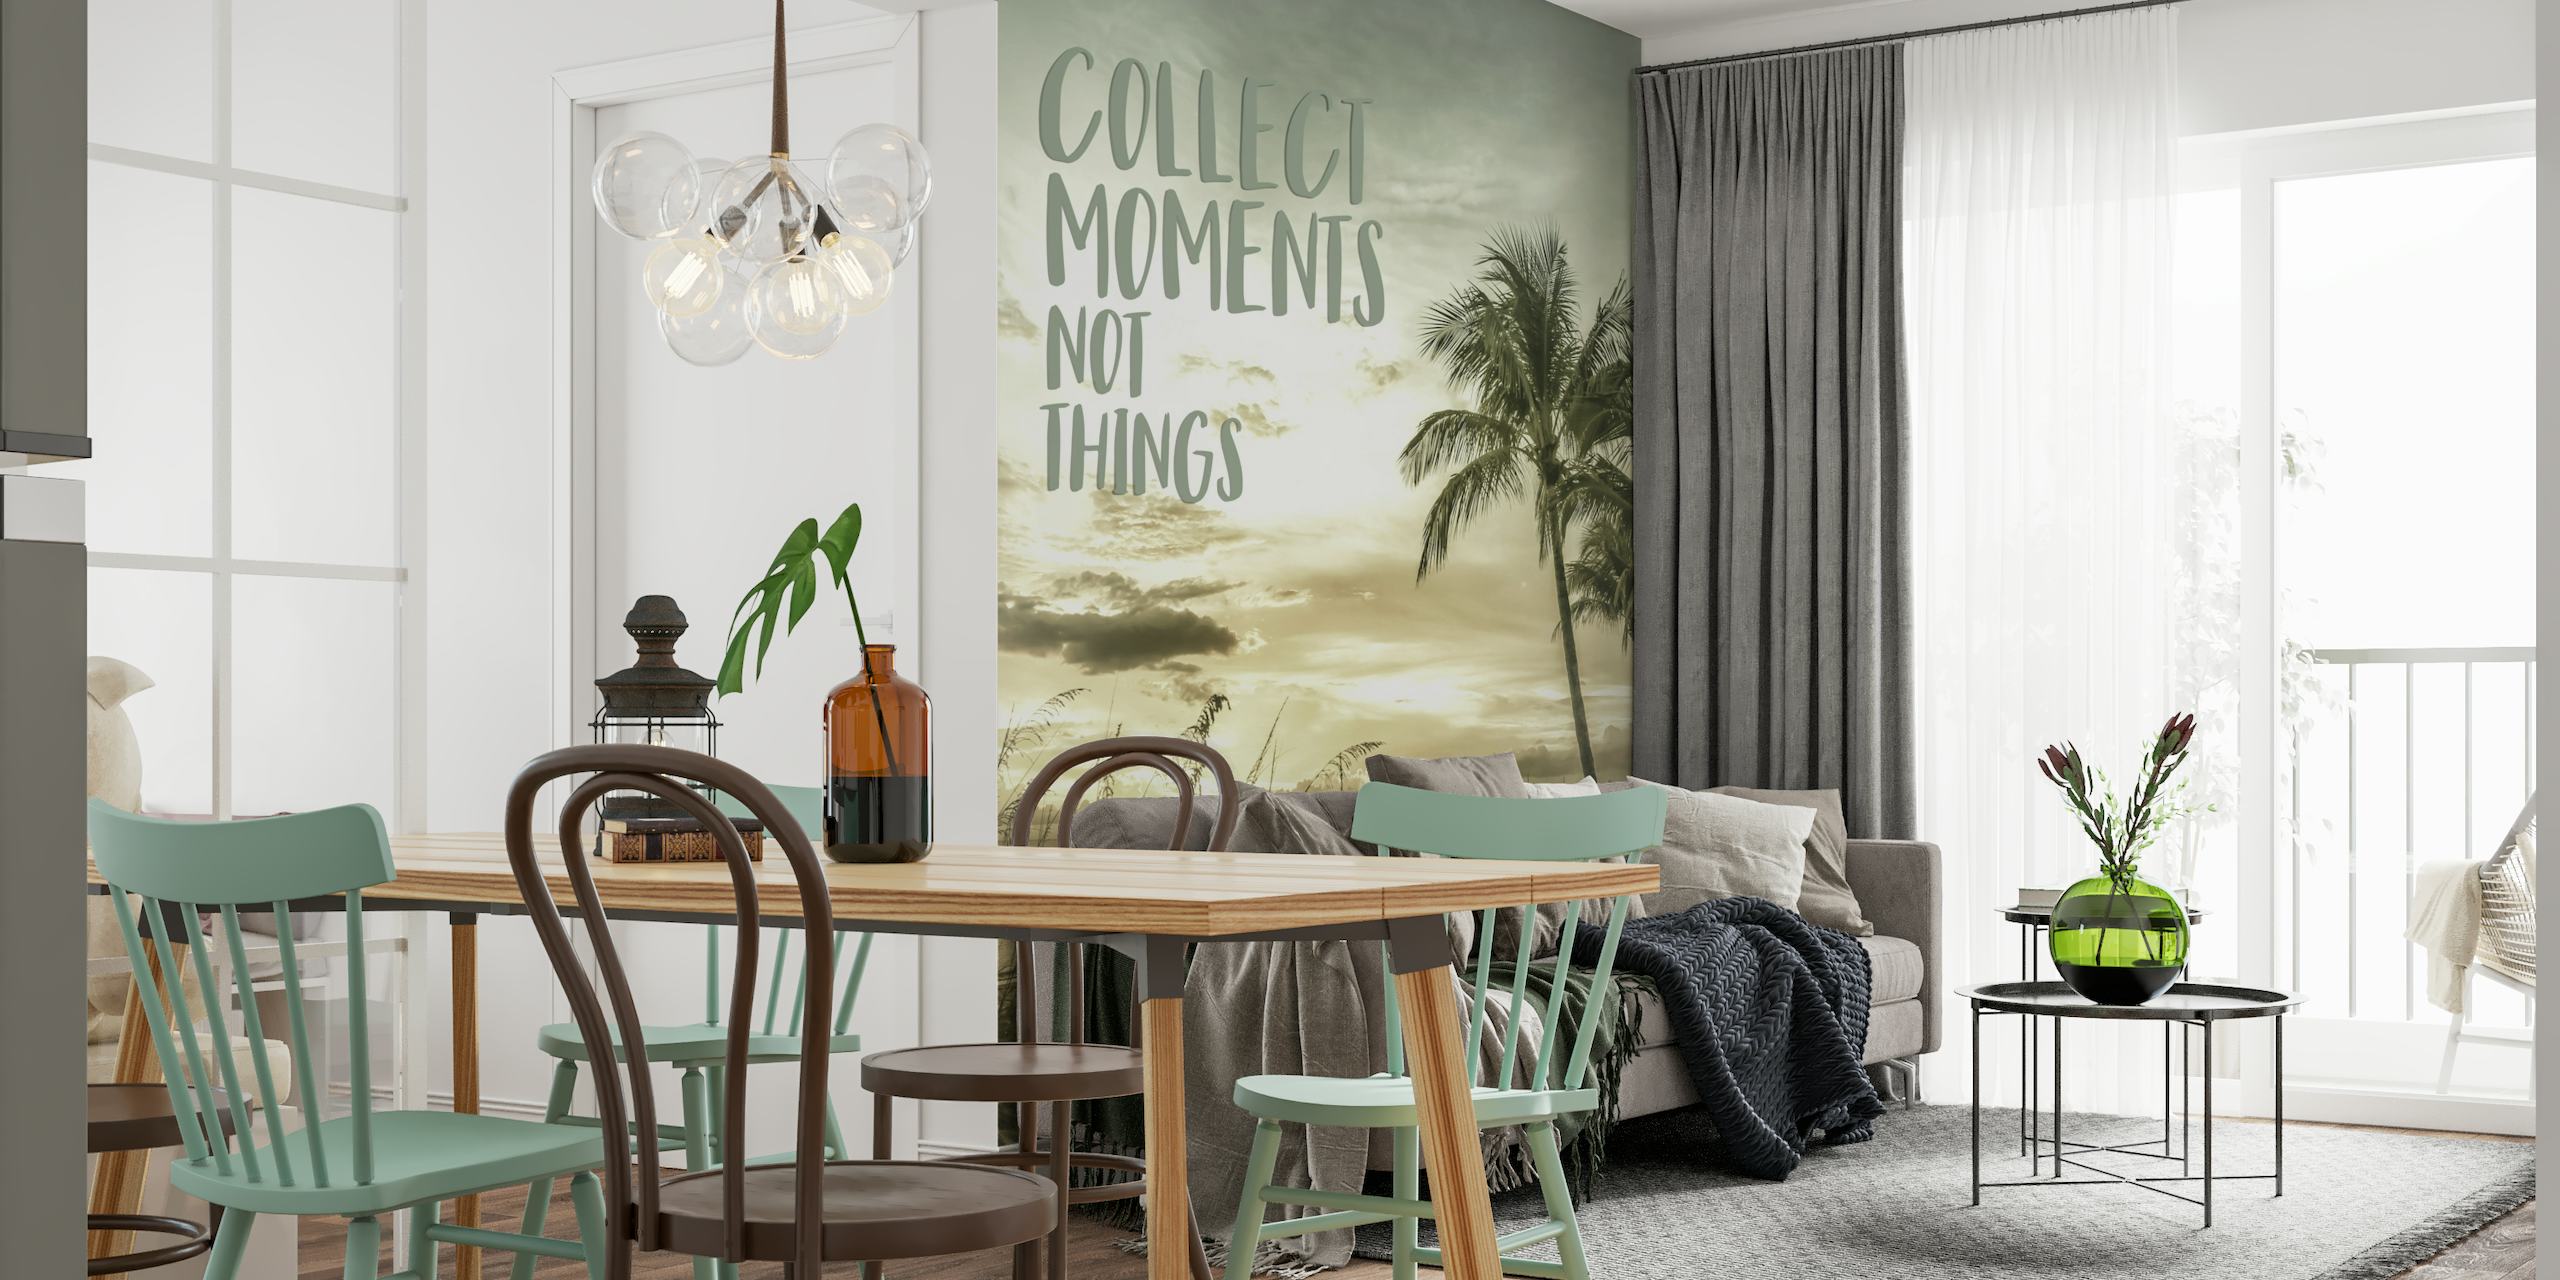 Collect moments not things | Sunset papiers peint